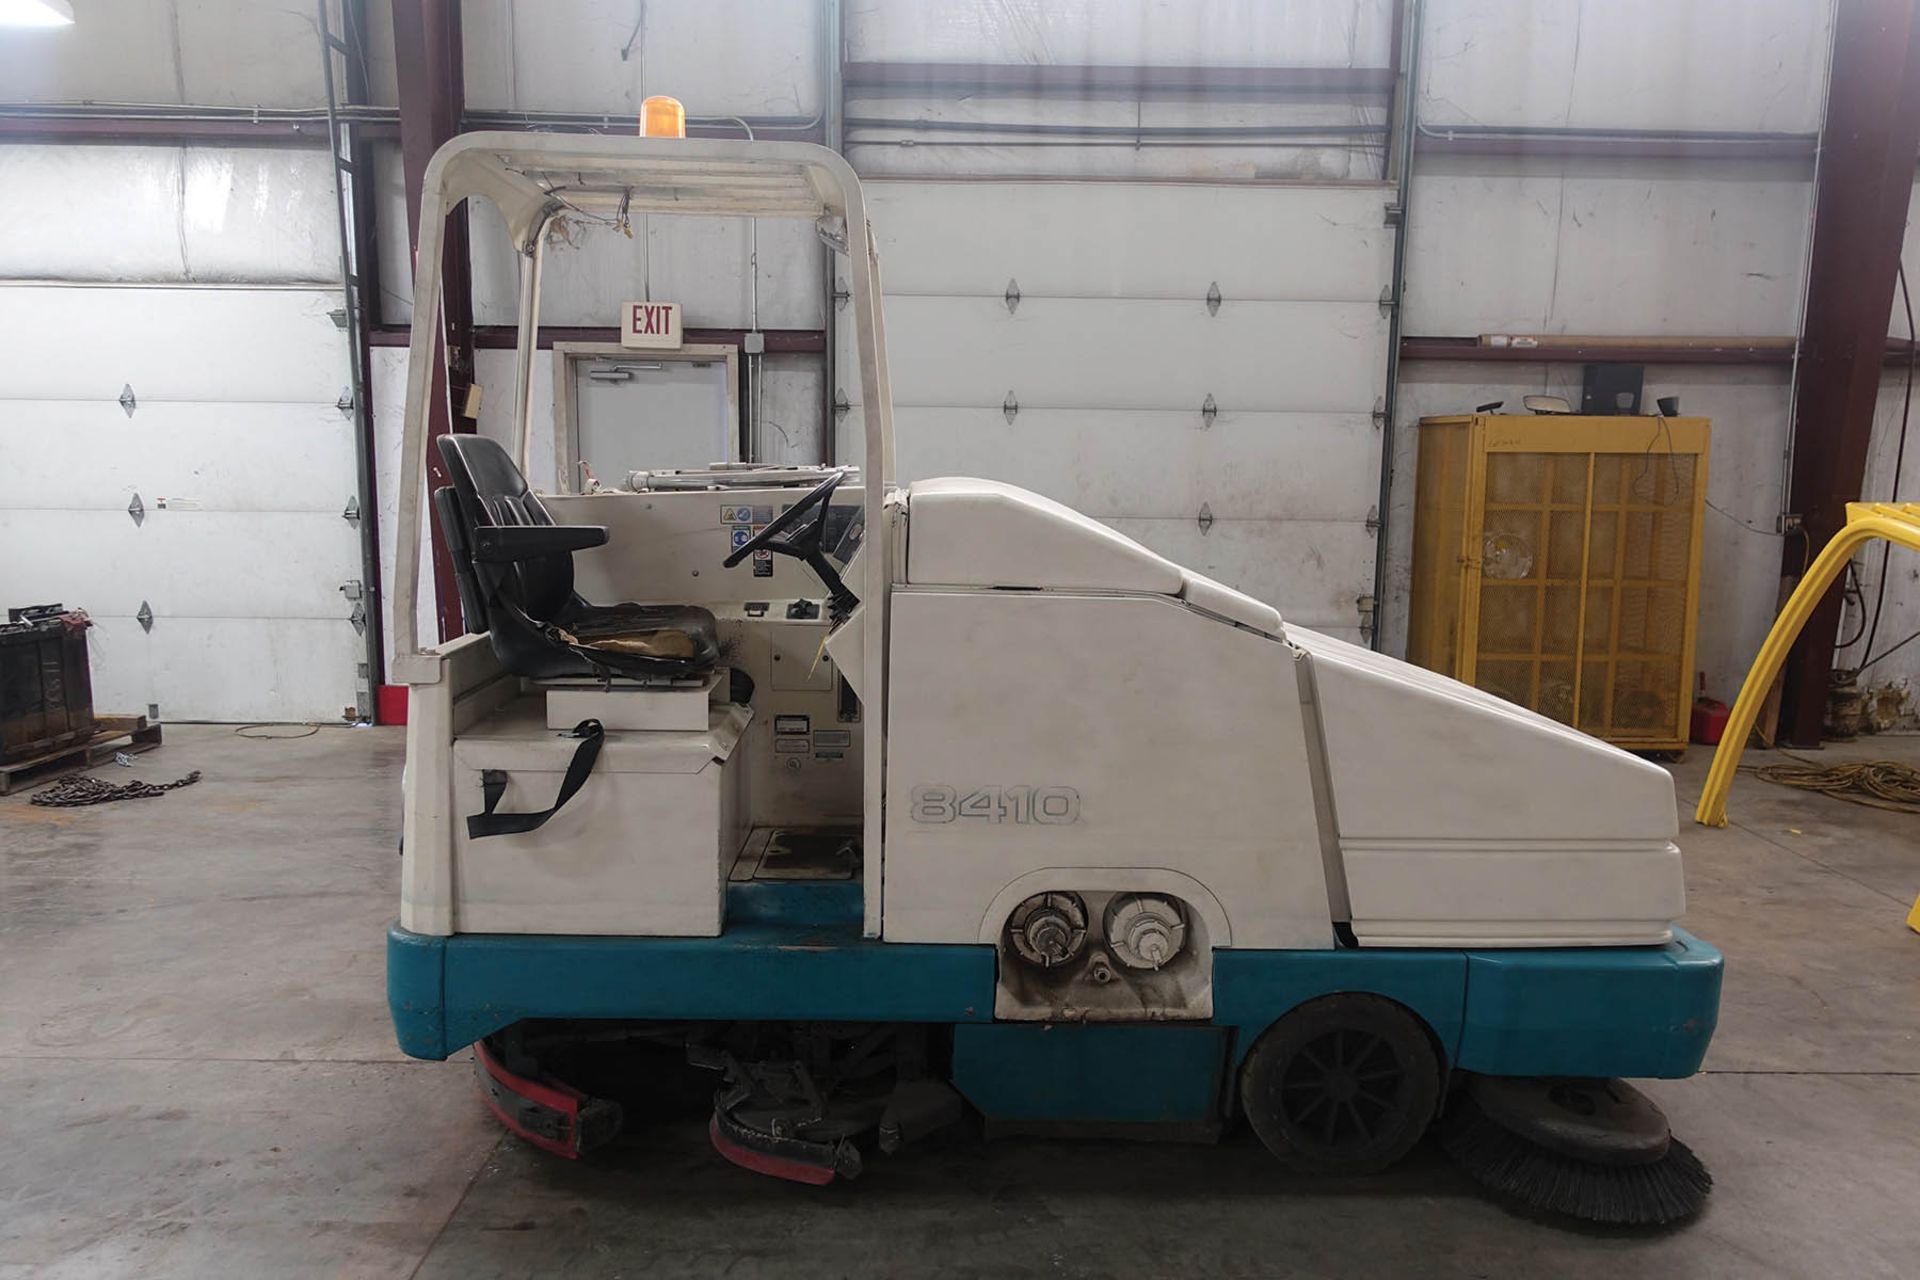 TENNANT SWEEPER/SCRUBBER; MODEL 8410, S/N 8410-14163, LPG, WEIGHT 7,000 LB., 60'' SWEEPING PATH, 2-